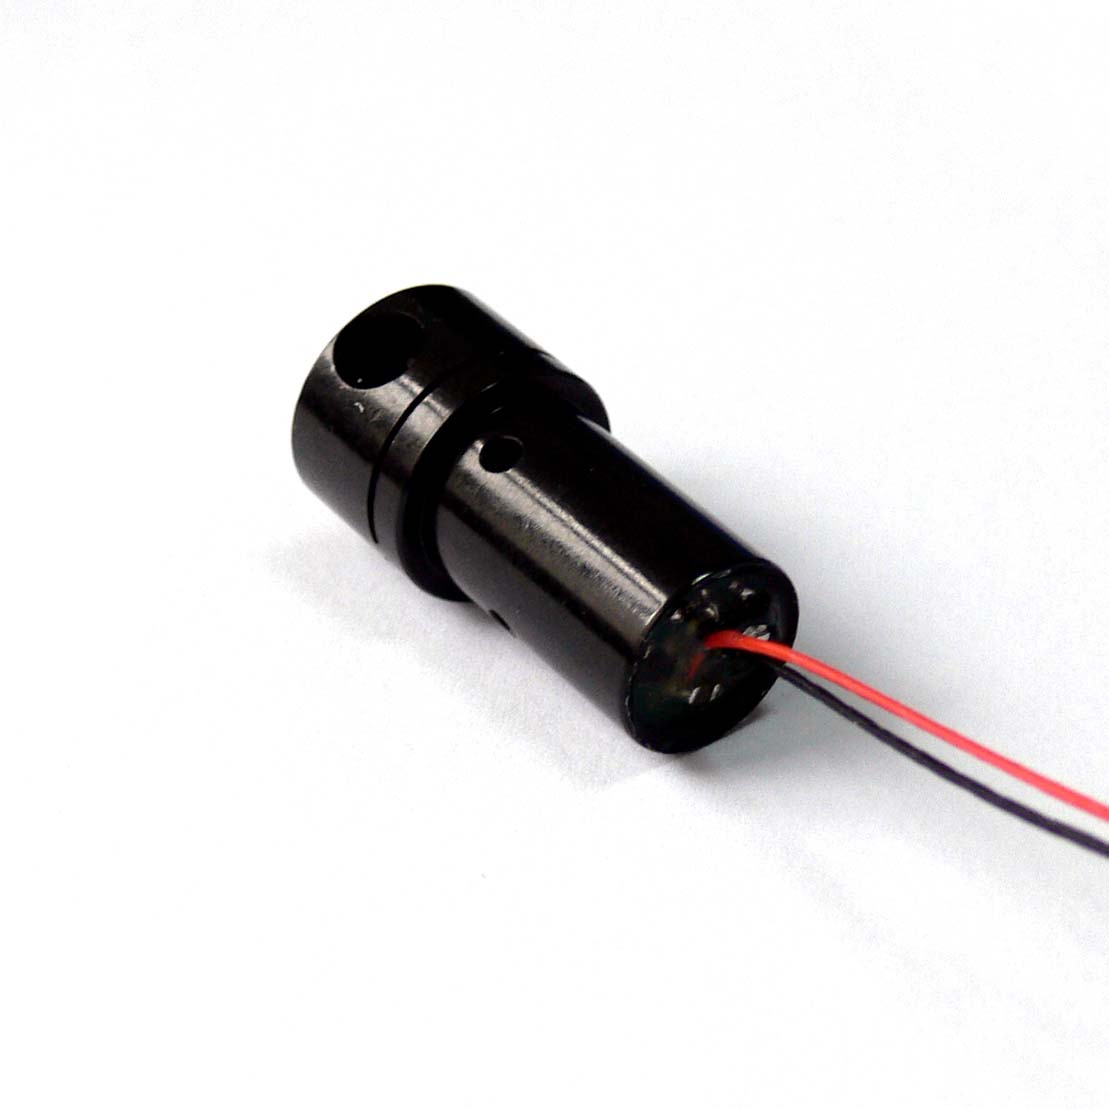 360 Degree Alignment Line Laser 660nm 2mW for Laser Distance Sensor and Precise Laser Measuring Device